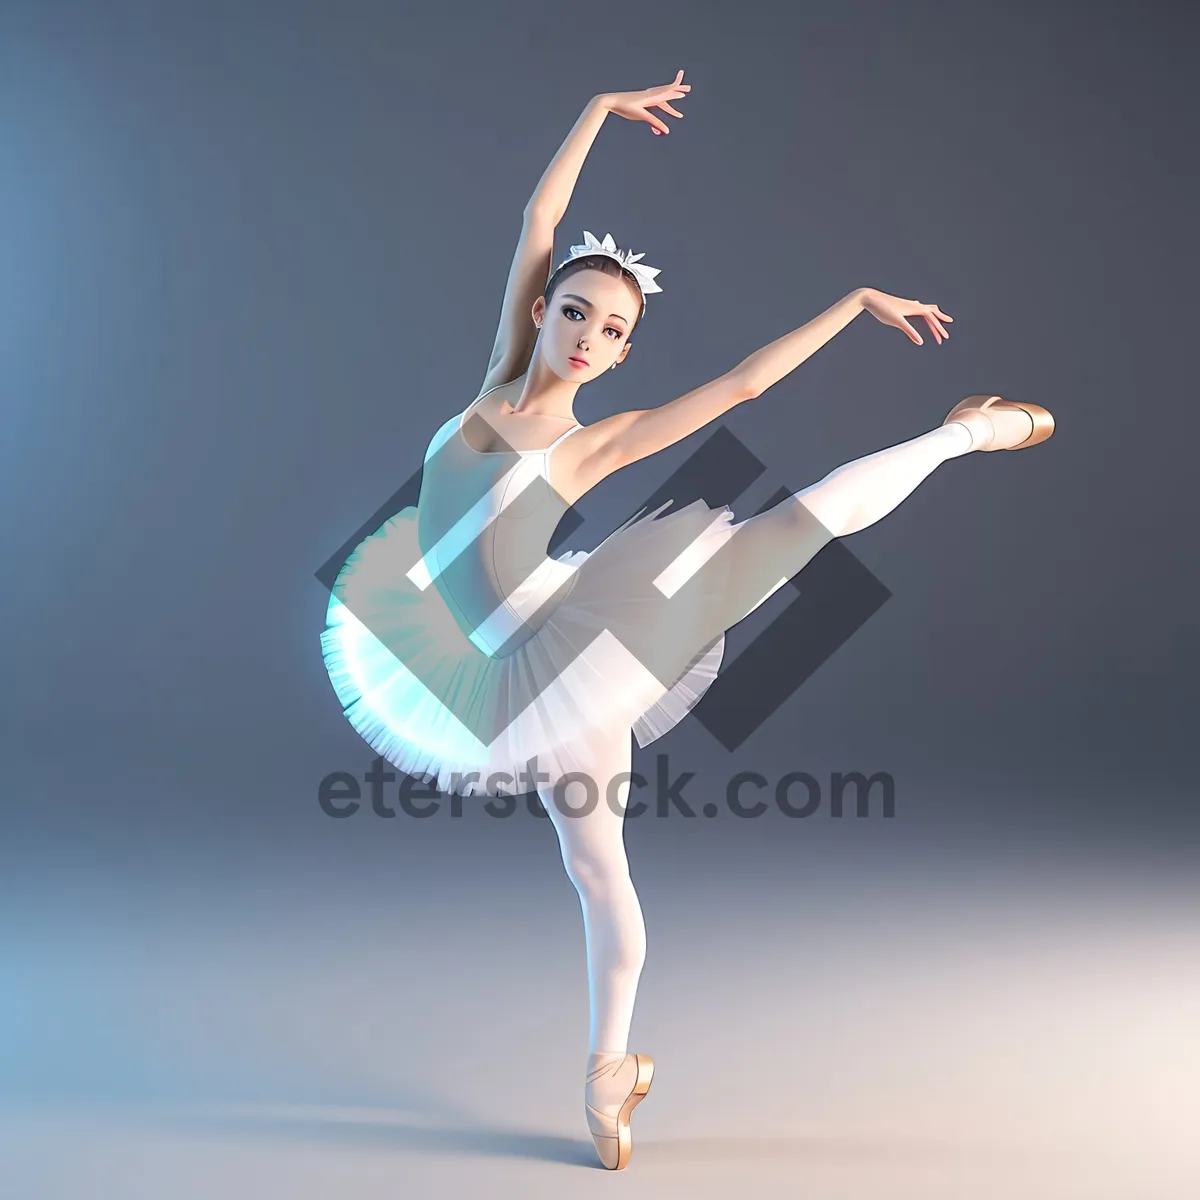 Picture of Elegant Ballet Performance: Graceful Dancer in Mid-Air Leap